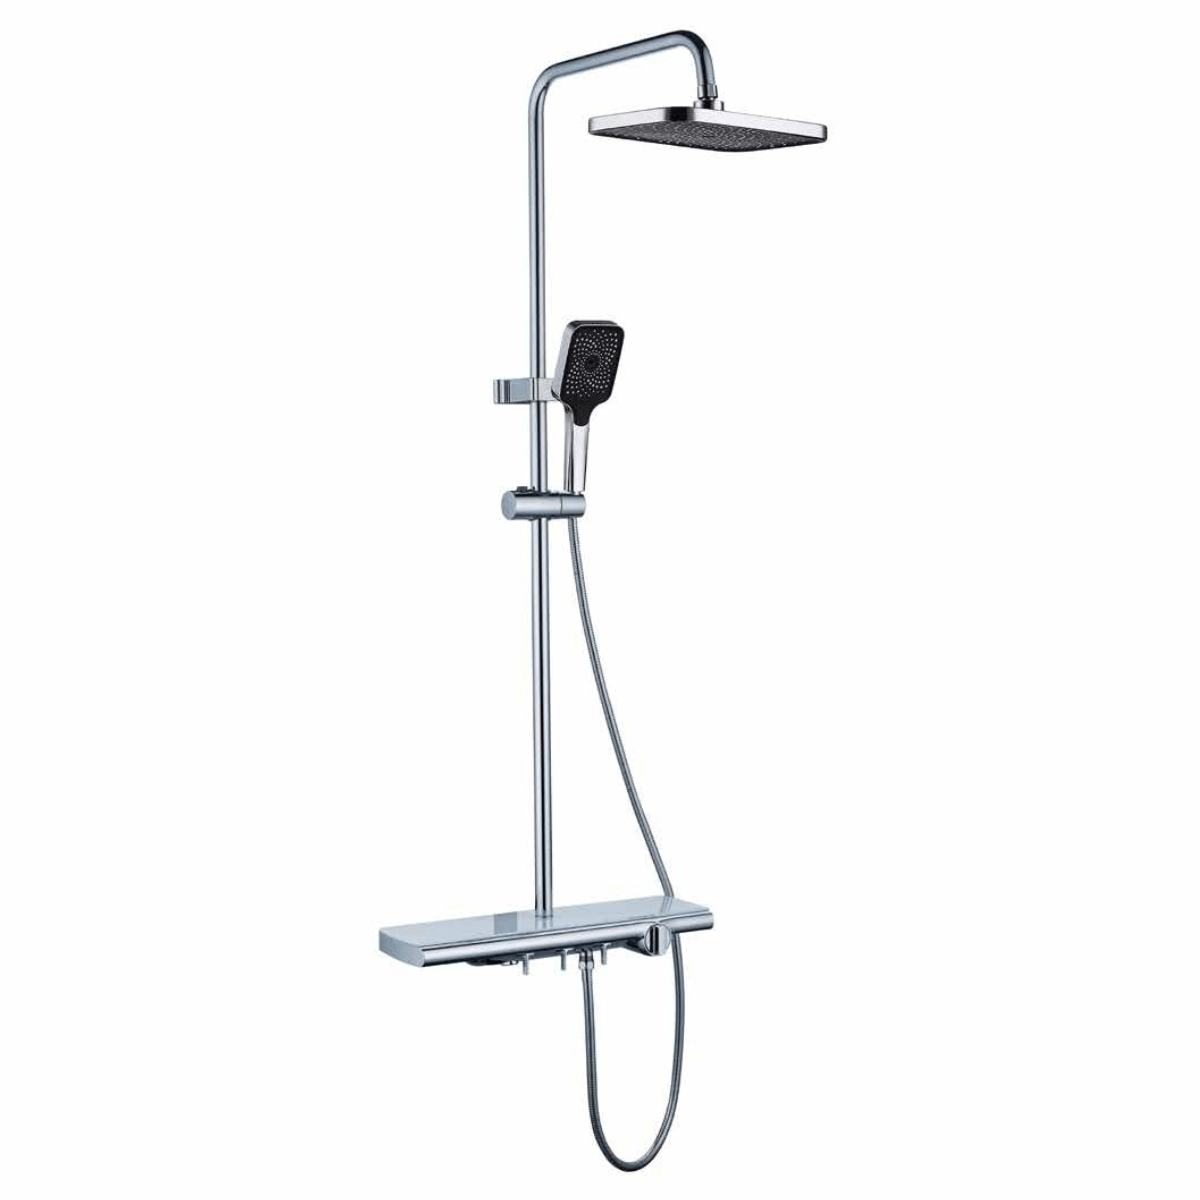 Buy WK Bathroom Chrome Wall Mounted Three-Function Square Rain Shower Set - K-8852 | Shop at Supply Master Accra, Ghana Shower Set Buy Tools hardware Building materials